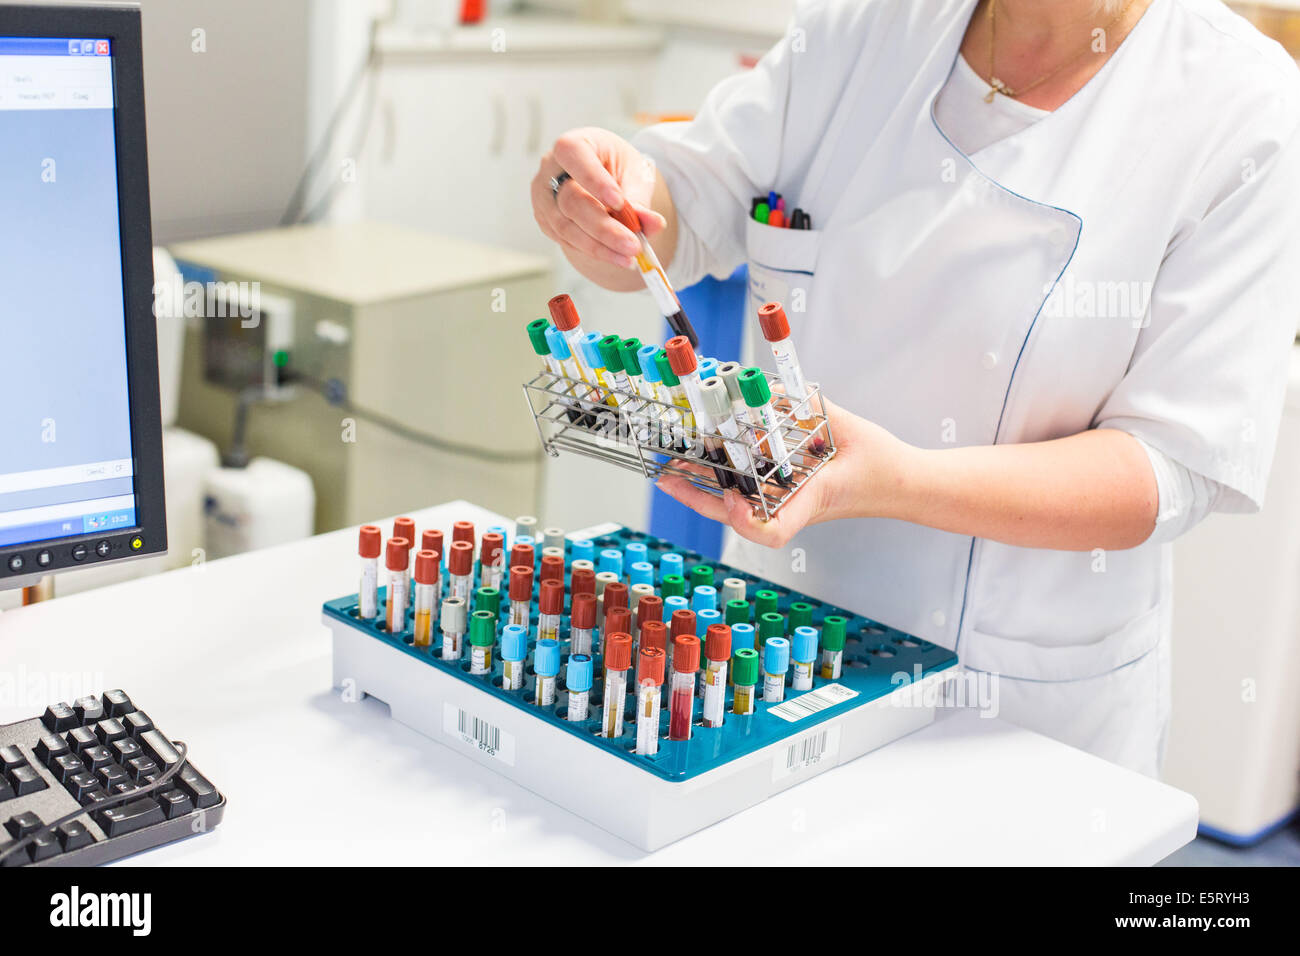 Female technician handling blood samples in a medical laboratory. Stock Photo